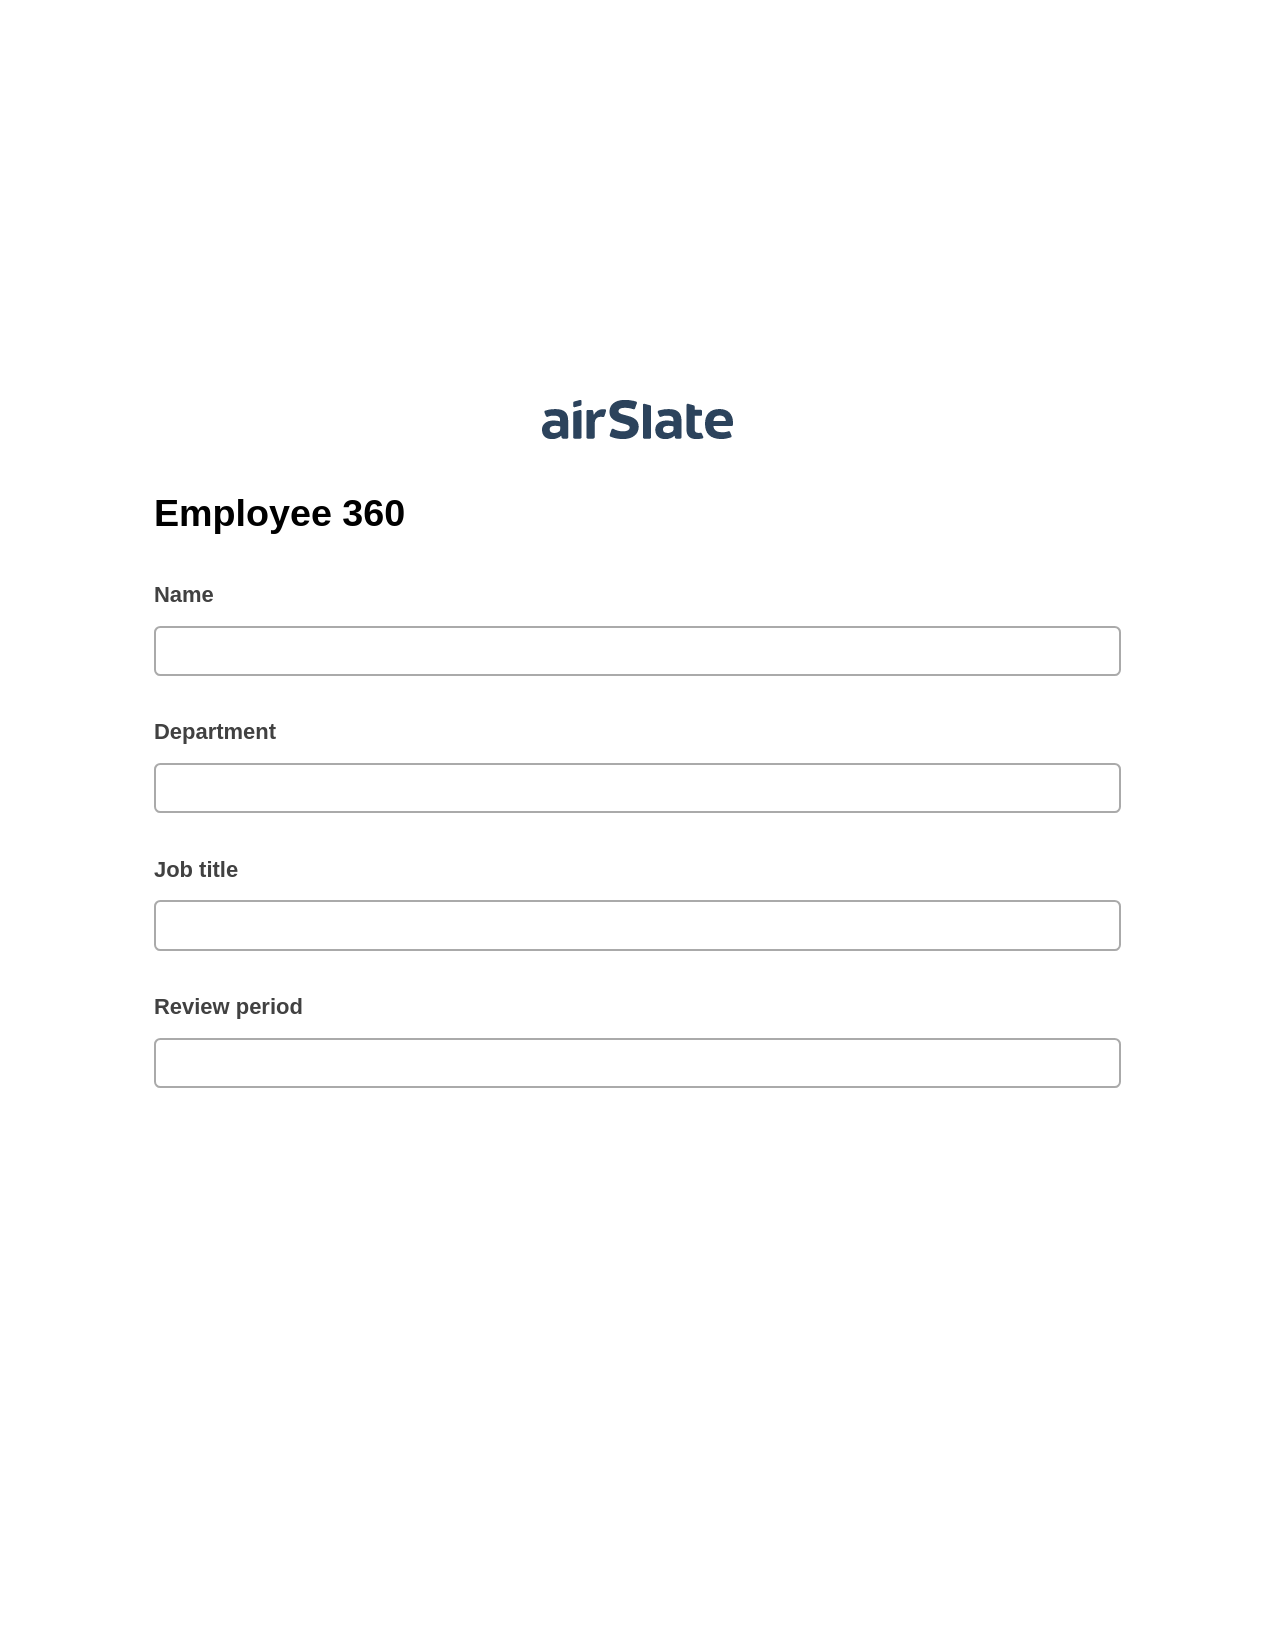 Multirole Employee 360 Pre-fill from CSV File Bot, Jira Bot, Export to Excel 365 Bot